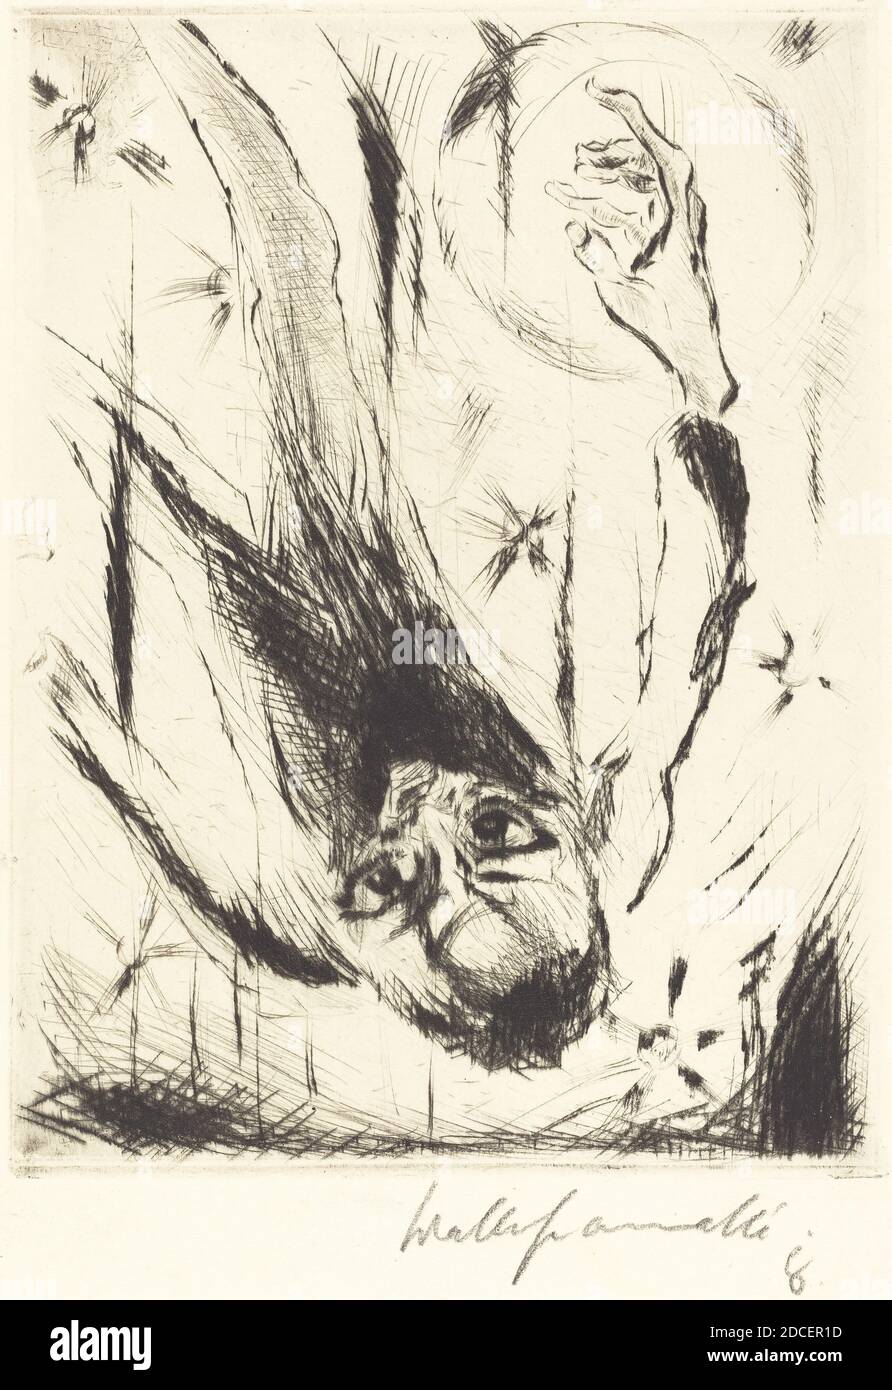 Walter Gramatté, (artist), German, 1897 - 1929, The Fall into Infinity, Der Rebell: pl.IV, (series), 1918, drypoint in black on laid paper, plate: 17.2 x 12.7 cm (6 3/4 x 5 in.), sheet: 30.8 x 25.5 cm (12 1/8 x 10 1/16 in Stock Photo